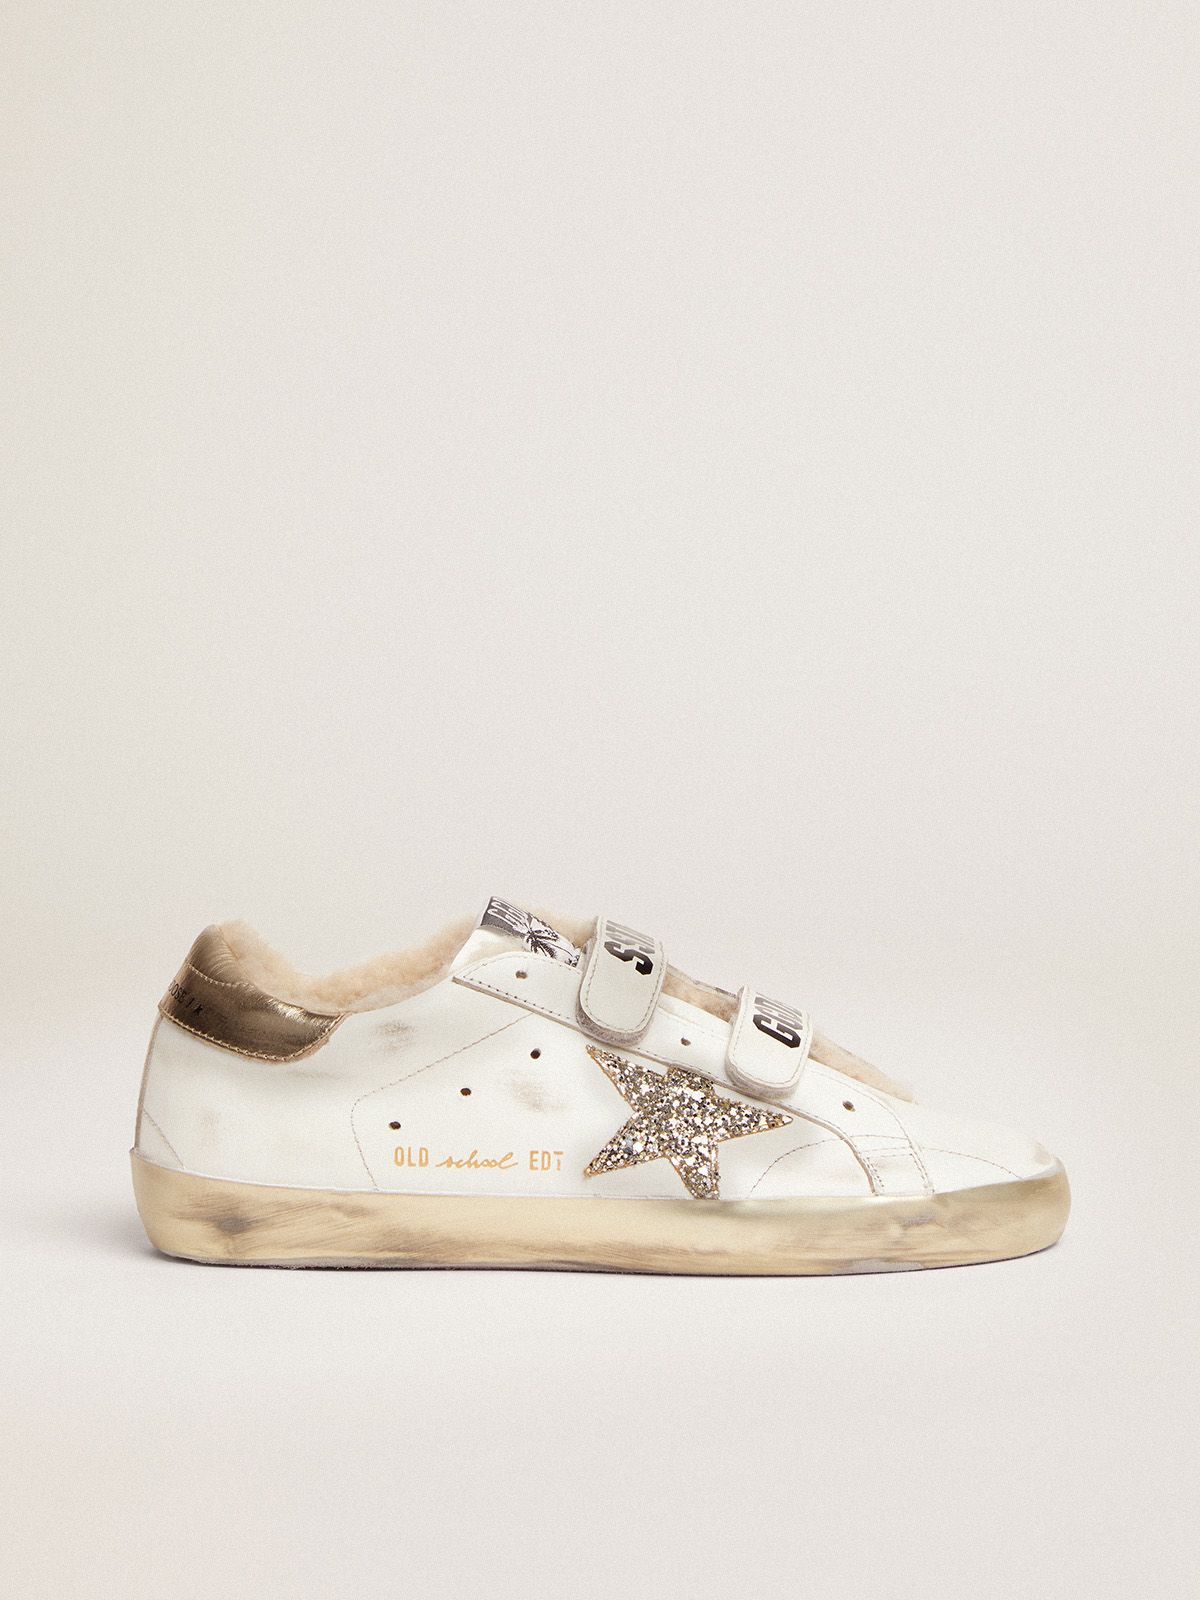 Sneakers Uomo Golden Goose Old School sneakers in white leather with platinum-colored glitter star and shearling lining